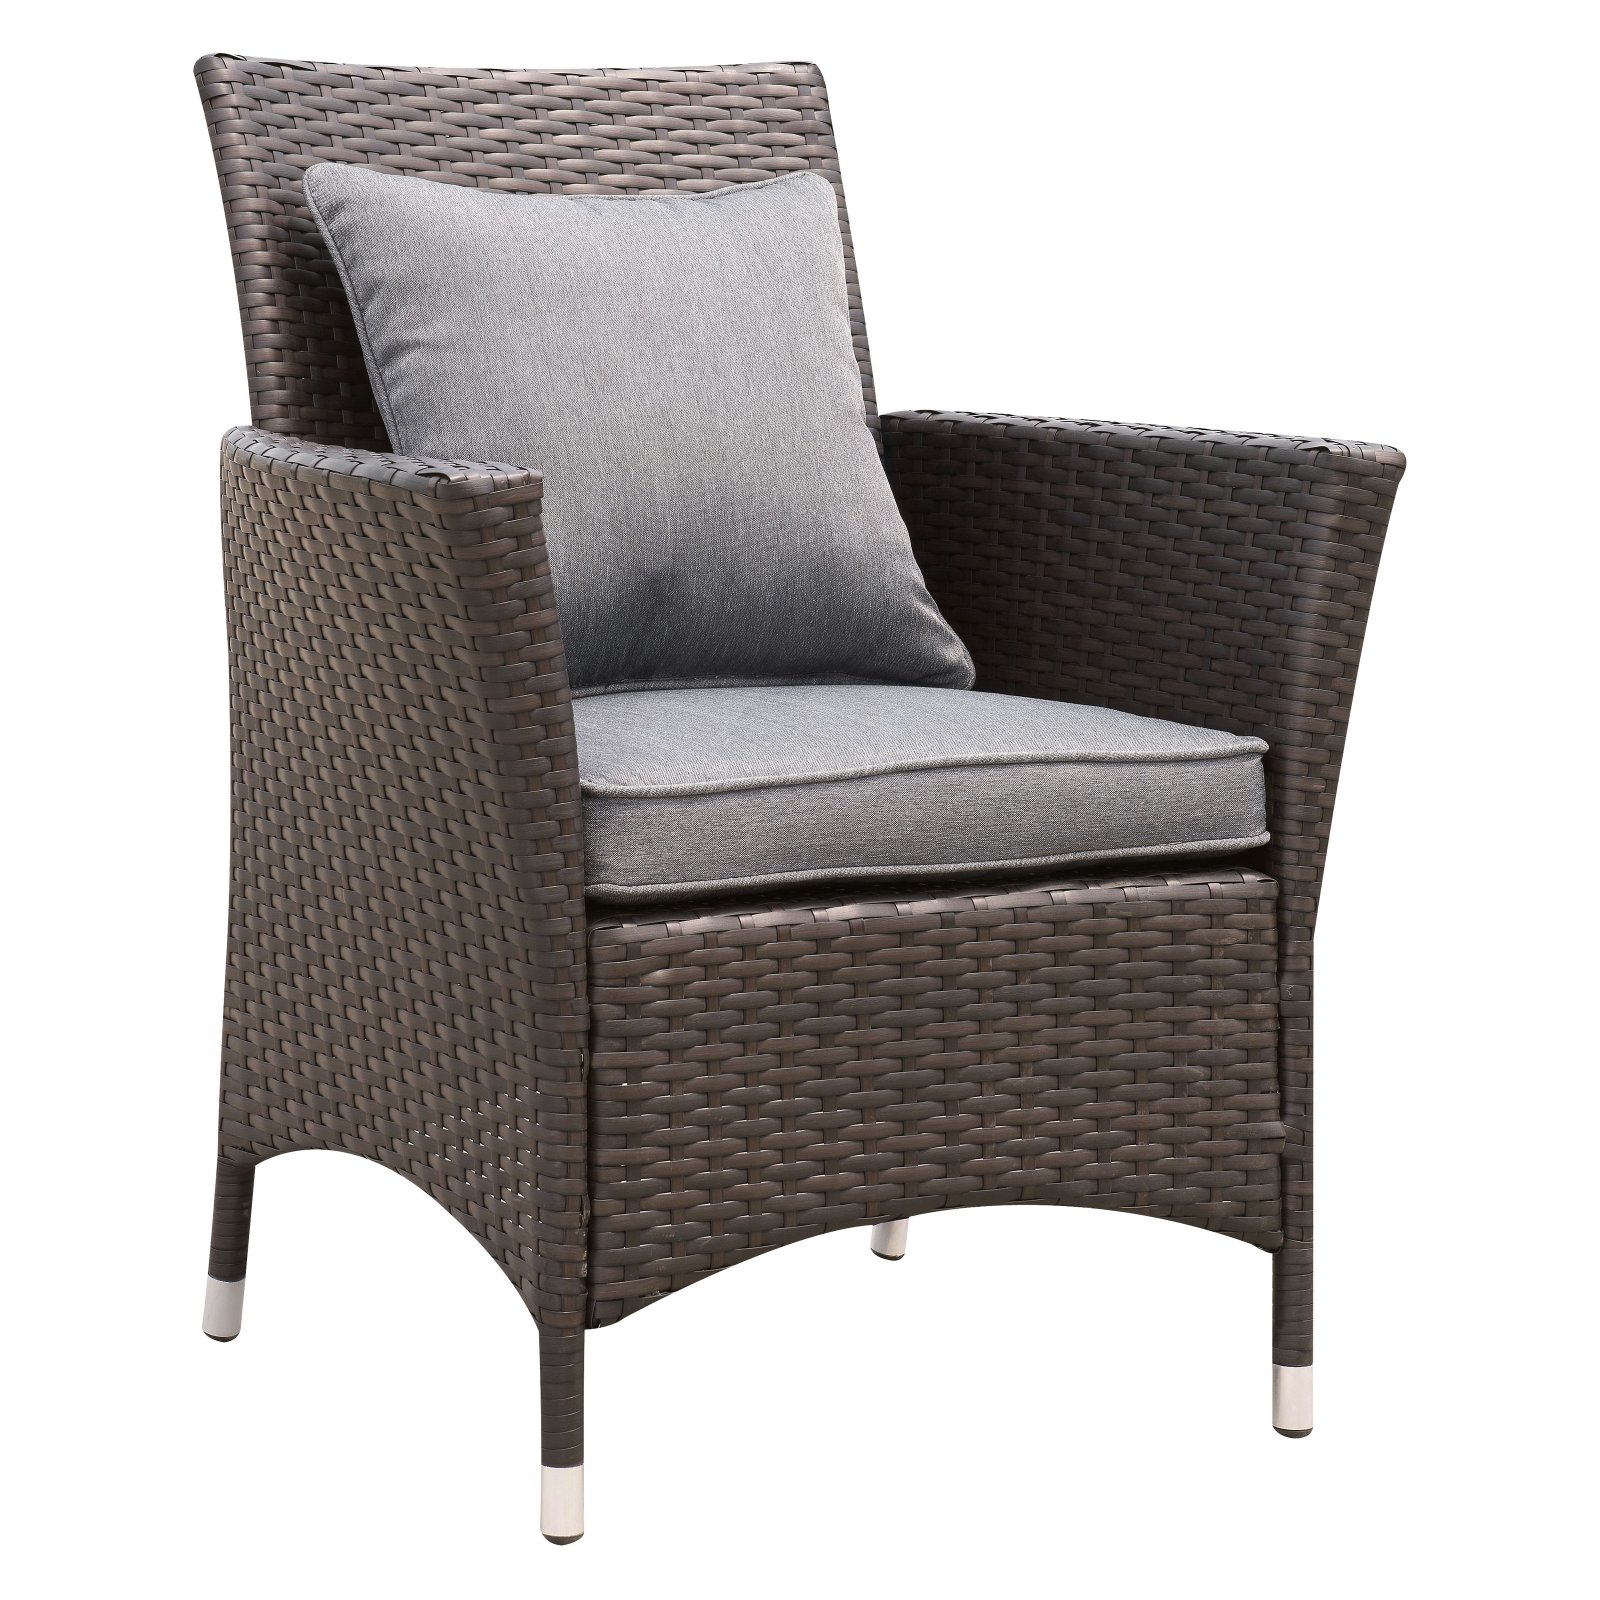 Furniture of America Karrot Contemporary Outdoor Dining Arm Chair - image 2 of 7